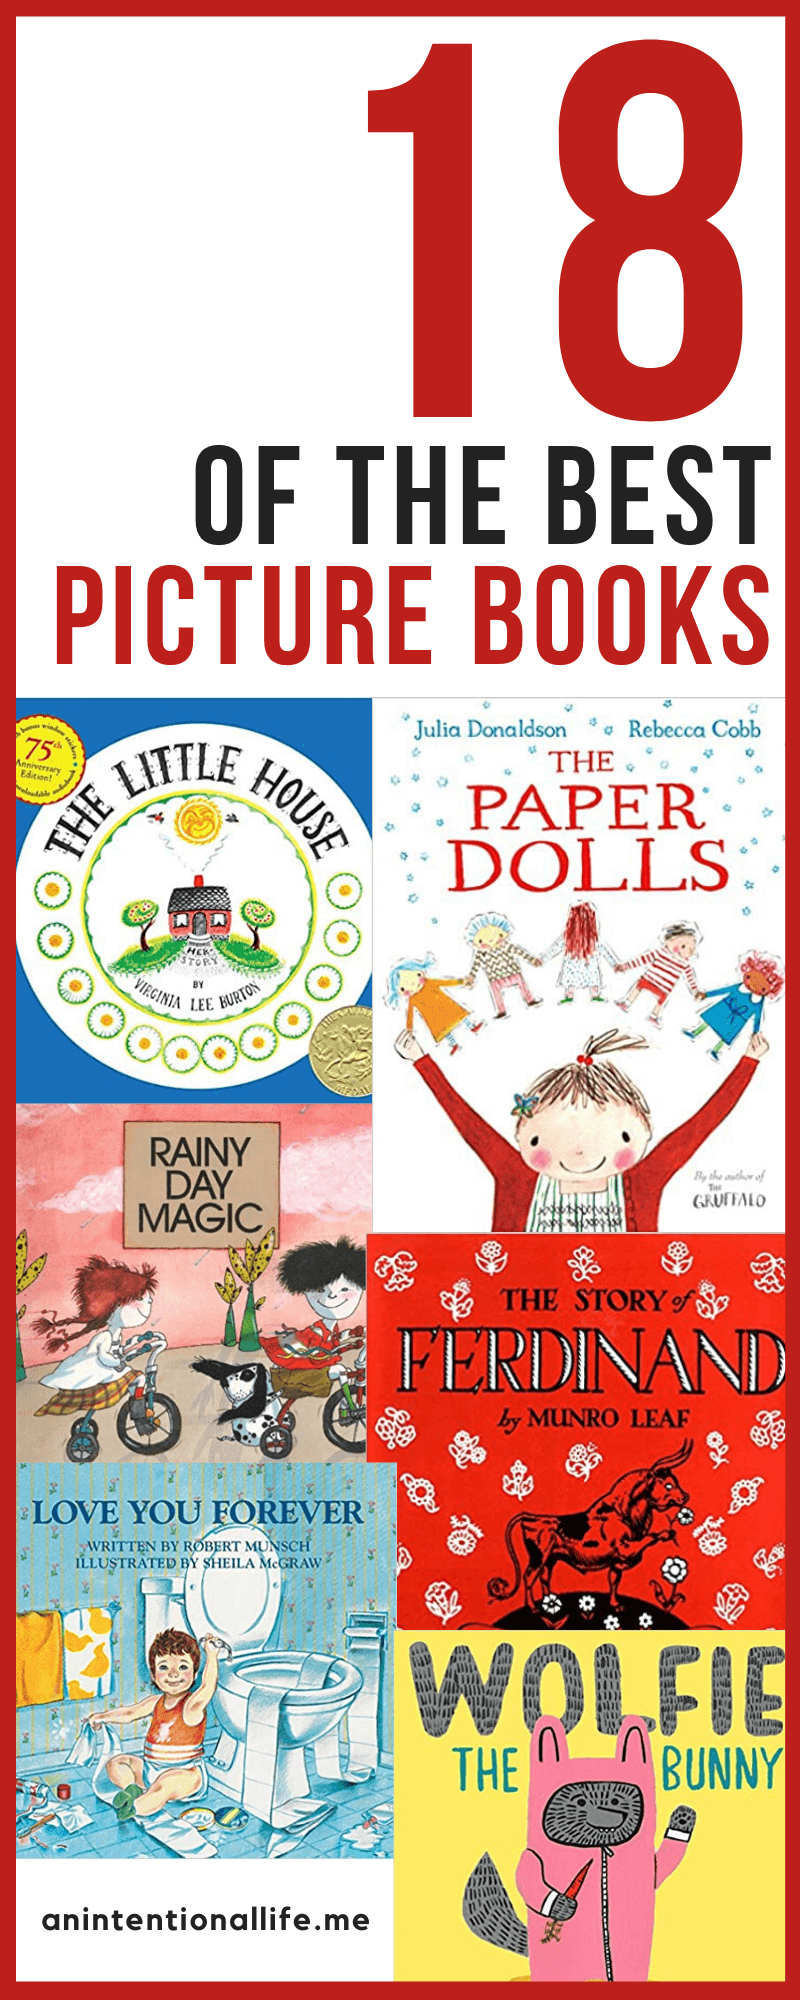 OThe Best Picture Books for Toddlers, Preschoolers and School Aged Children